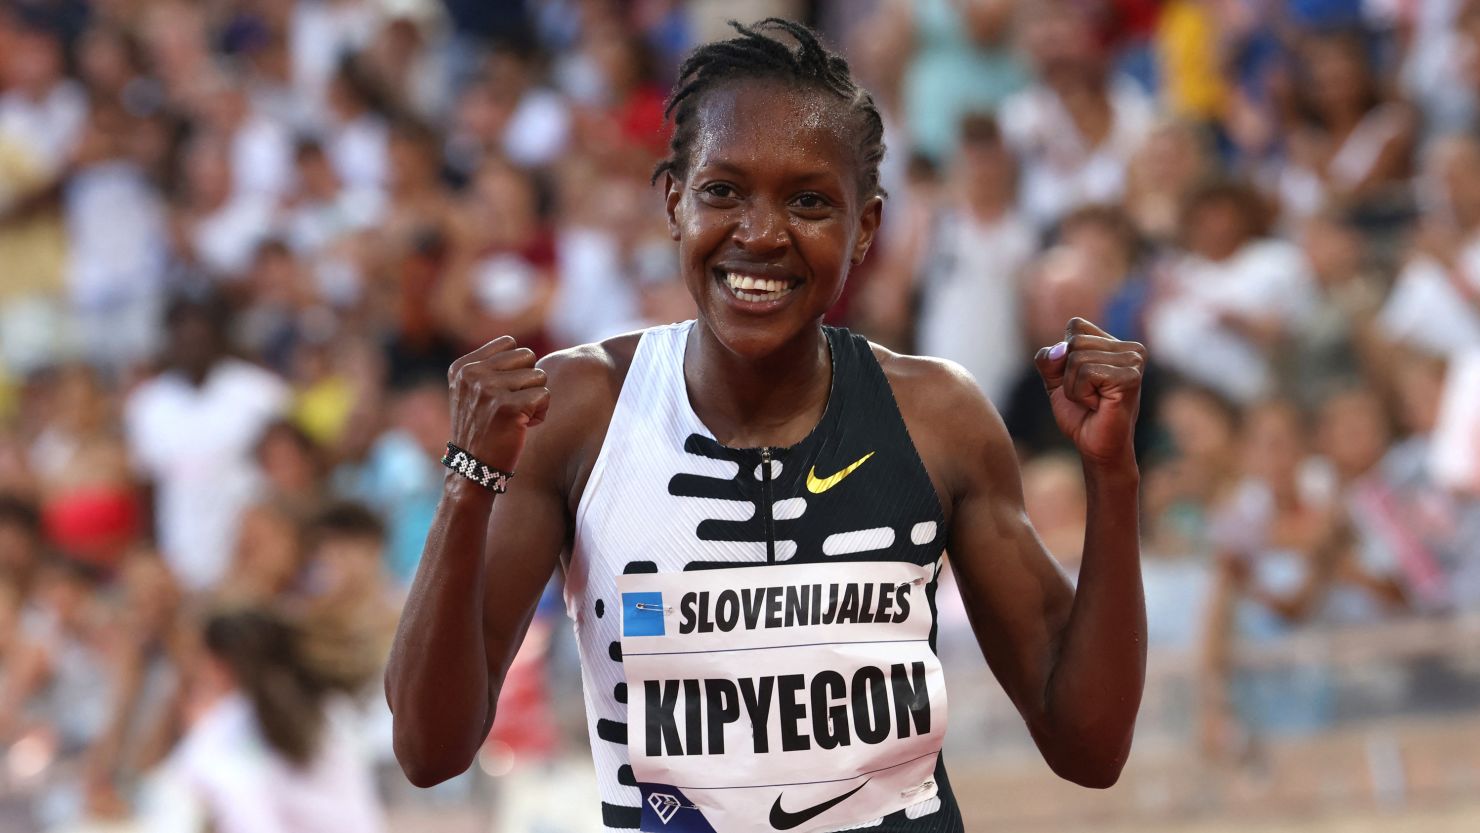 Kenya's Faith Kipyegon celebrates after winning the women's 1 mile final and setting a new world record.